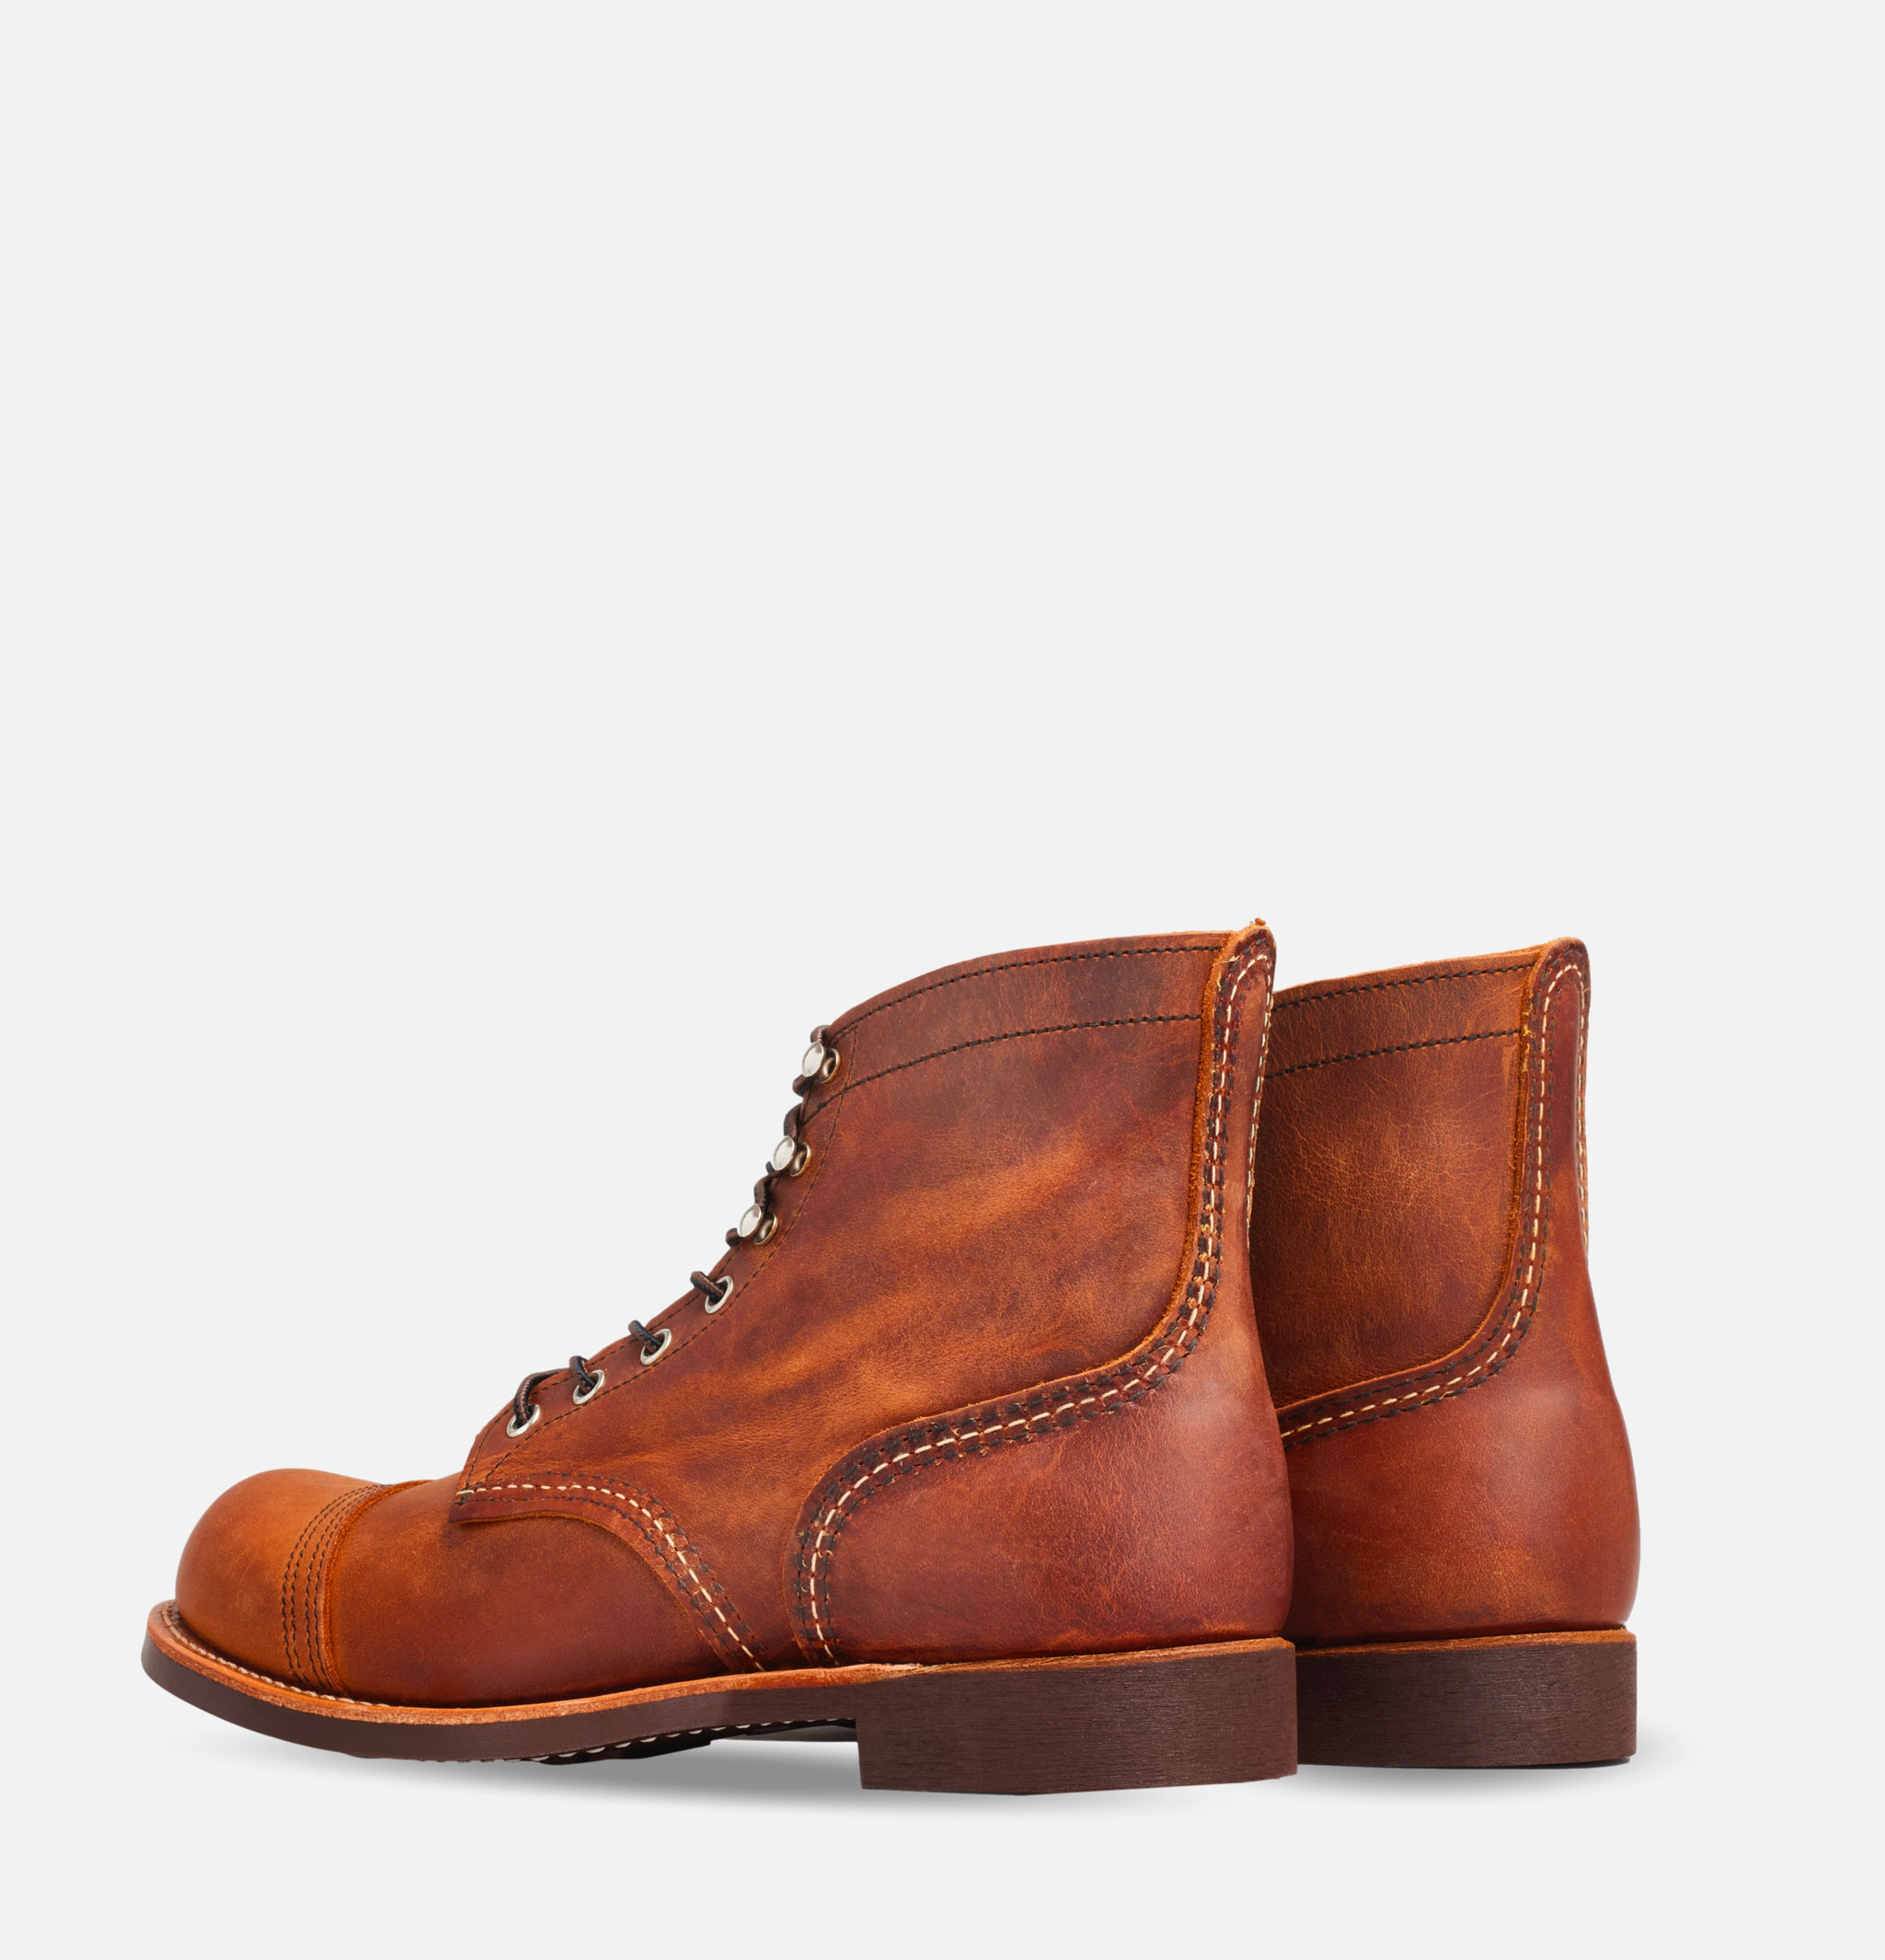 Red Wing Shoes - 8085 - Iron Ranger Copper